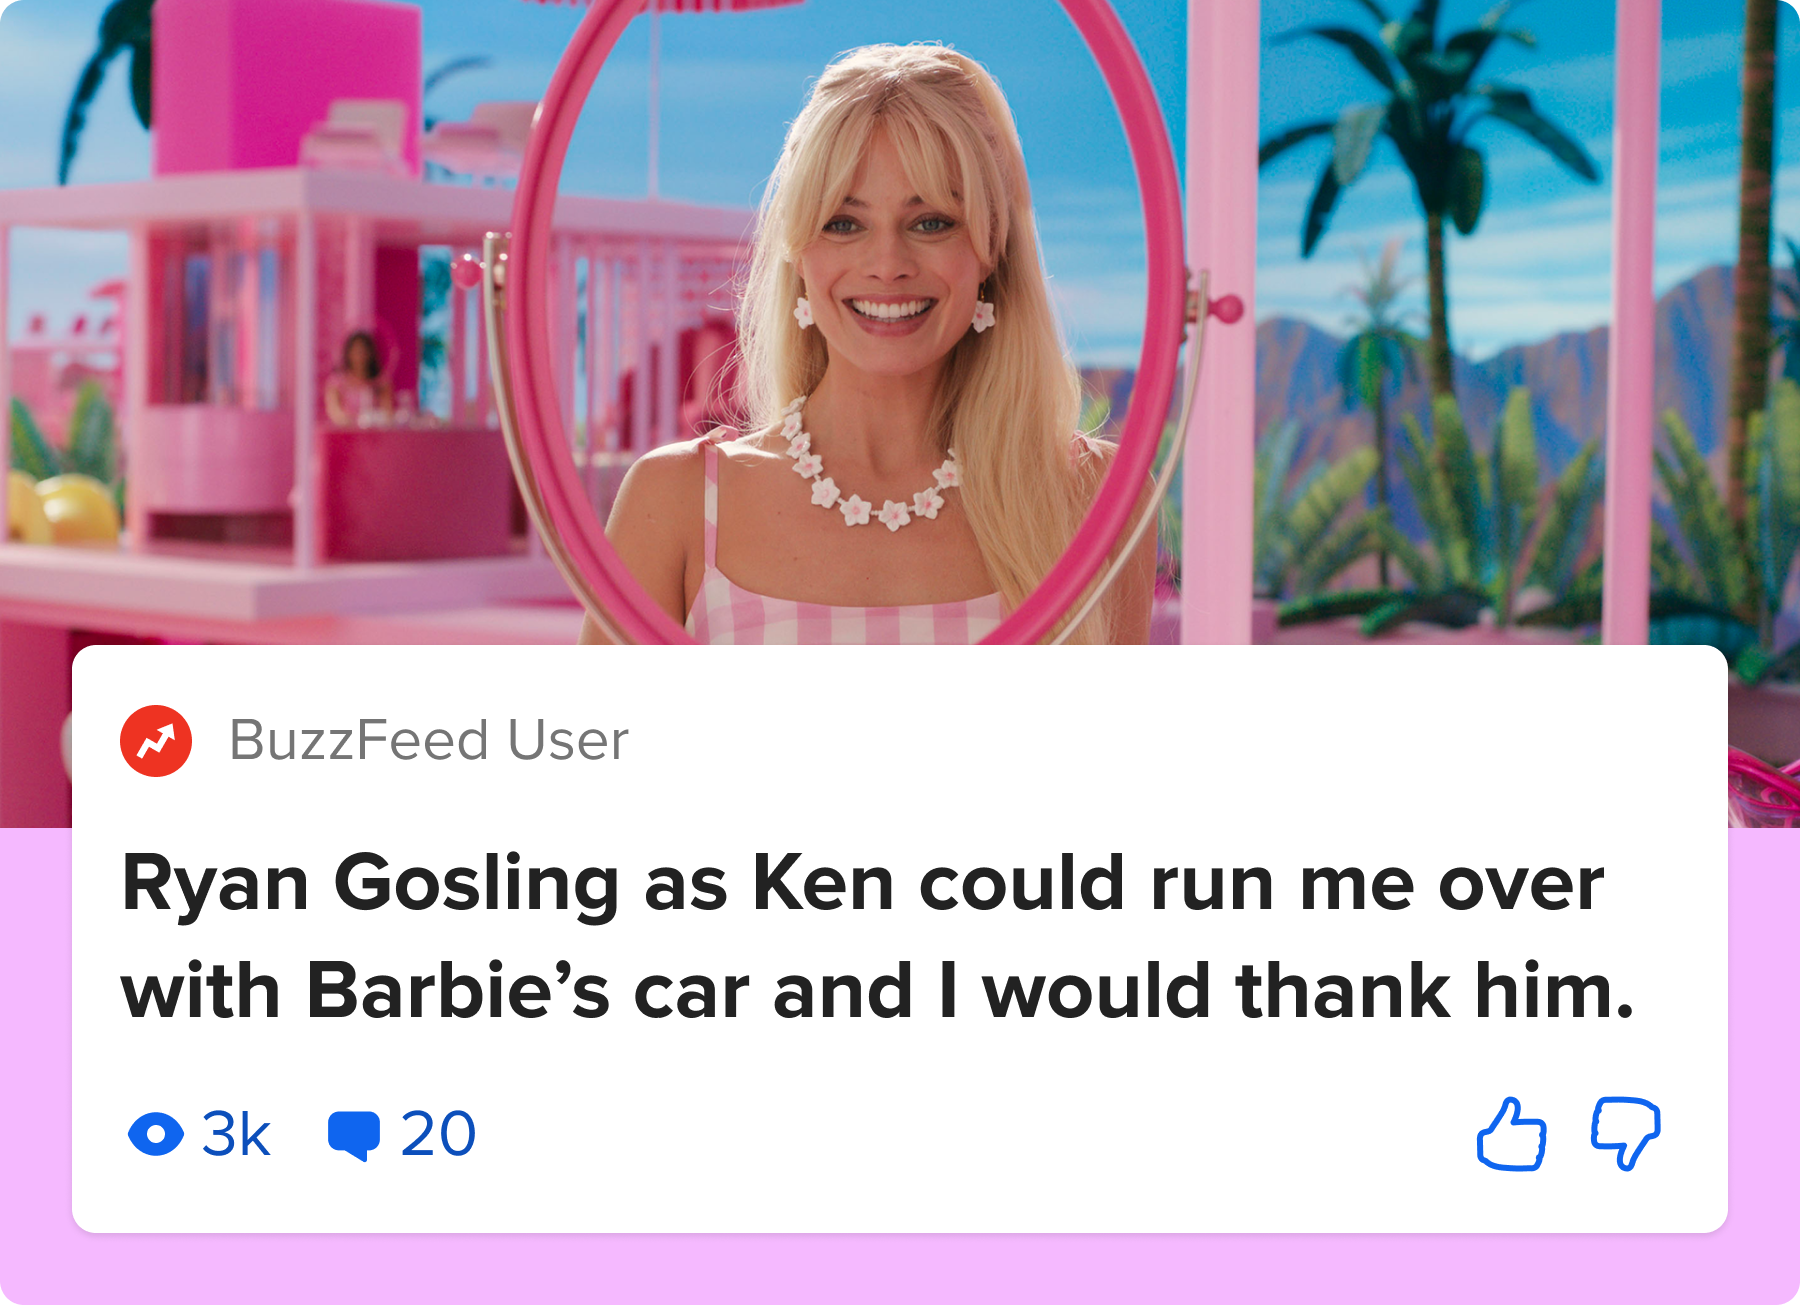 BuzzFeed user&#x27;s comment: &quot;Ryan Gosling as Ken could run me over with Barbie&#x27;s car and I would thank him&quot;